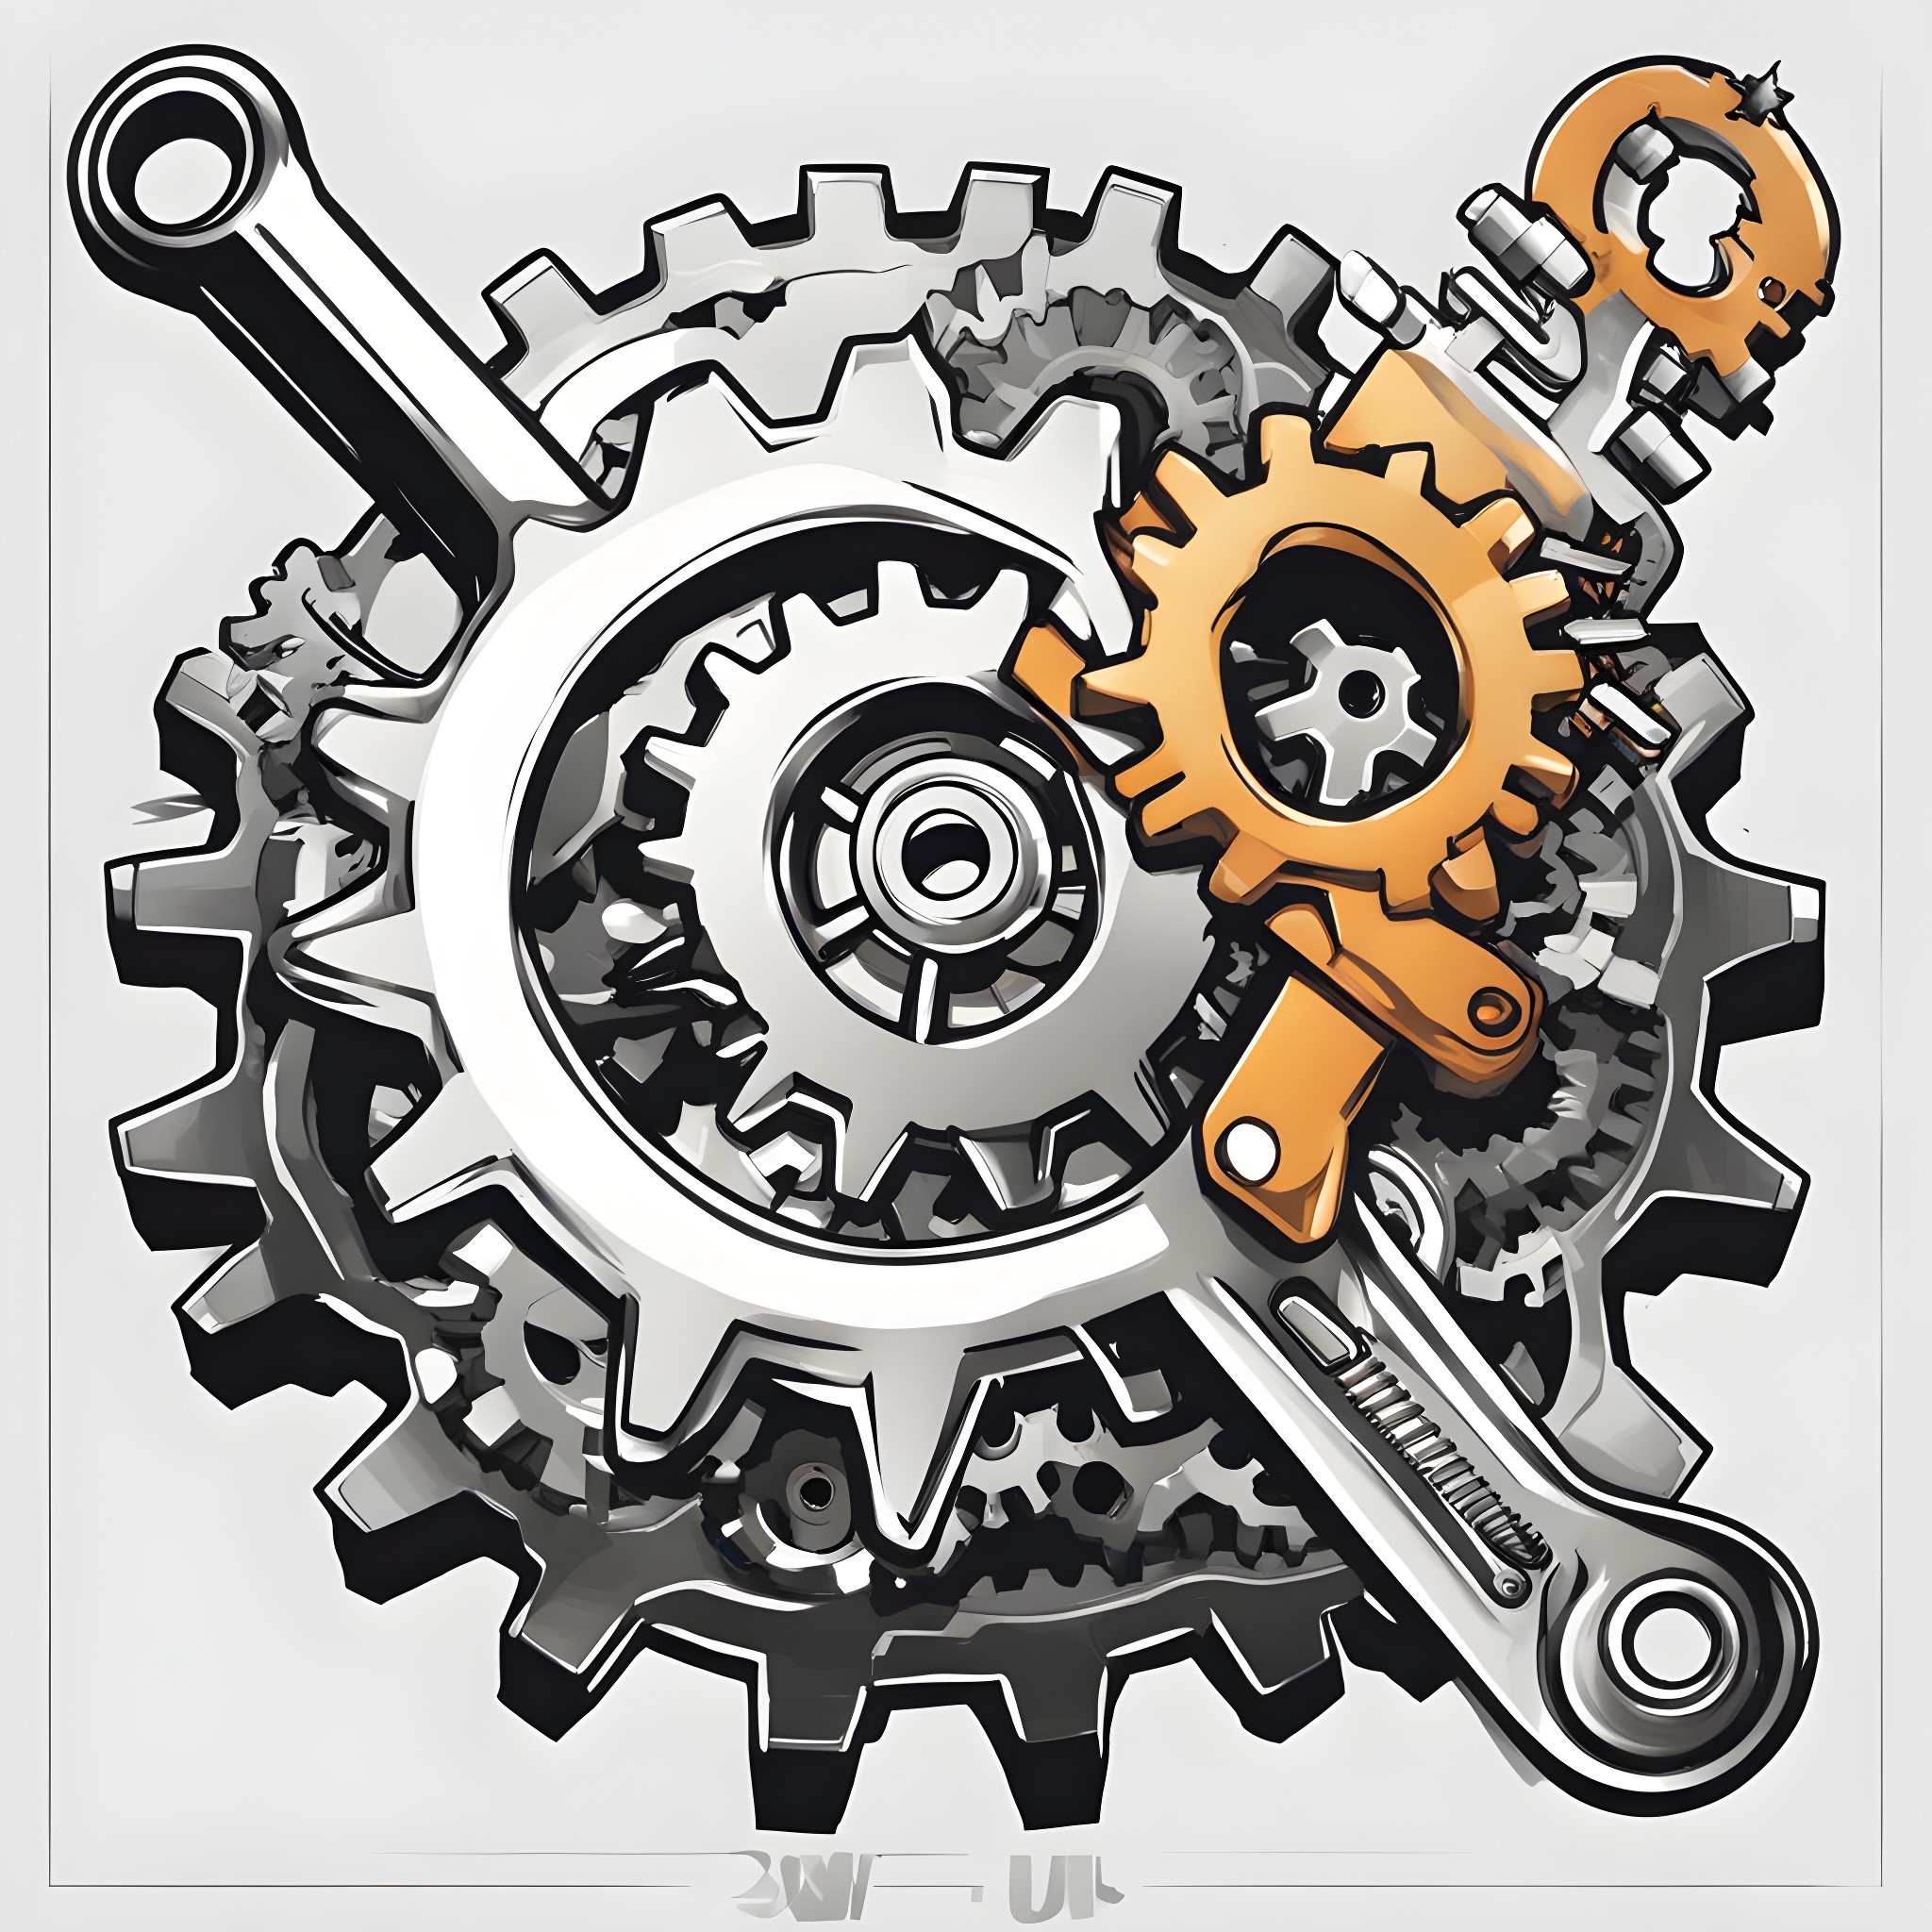 an-illustration-of-a-gear-and-a-wrench-for-repair-and-service Businesses and Corporations